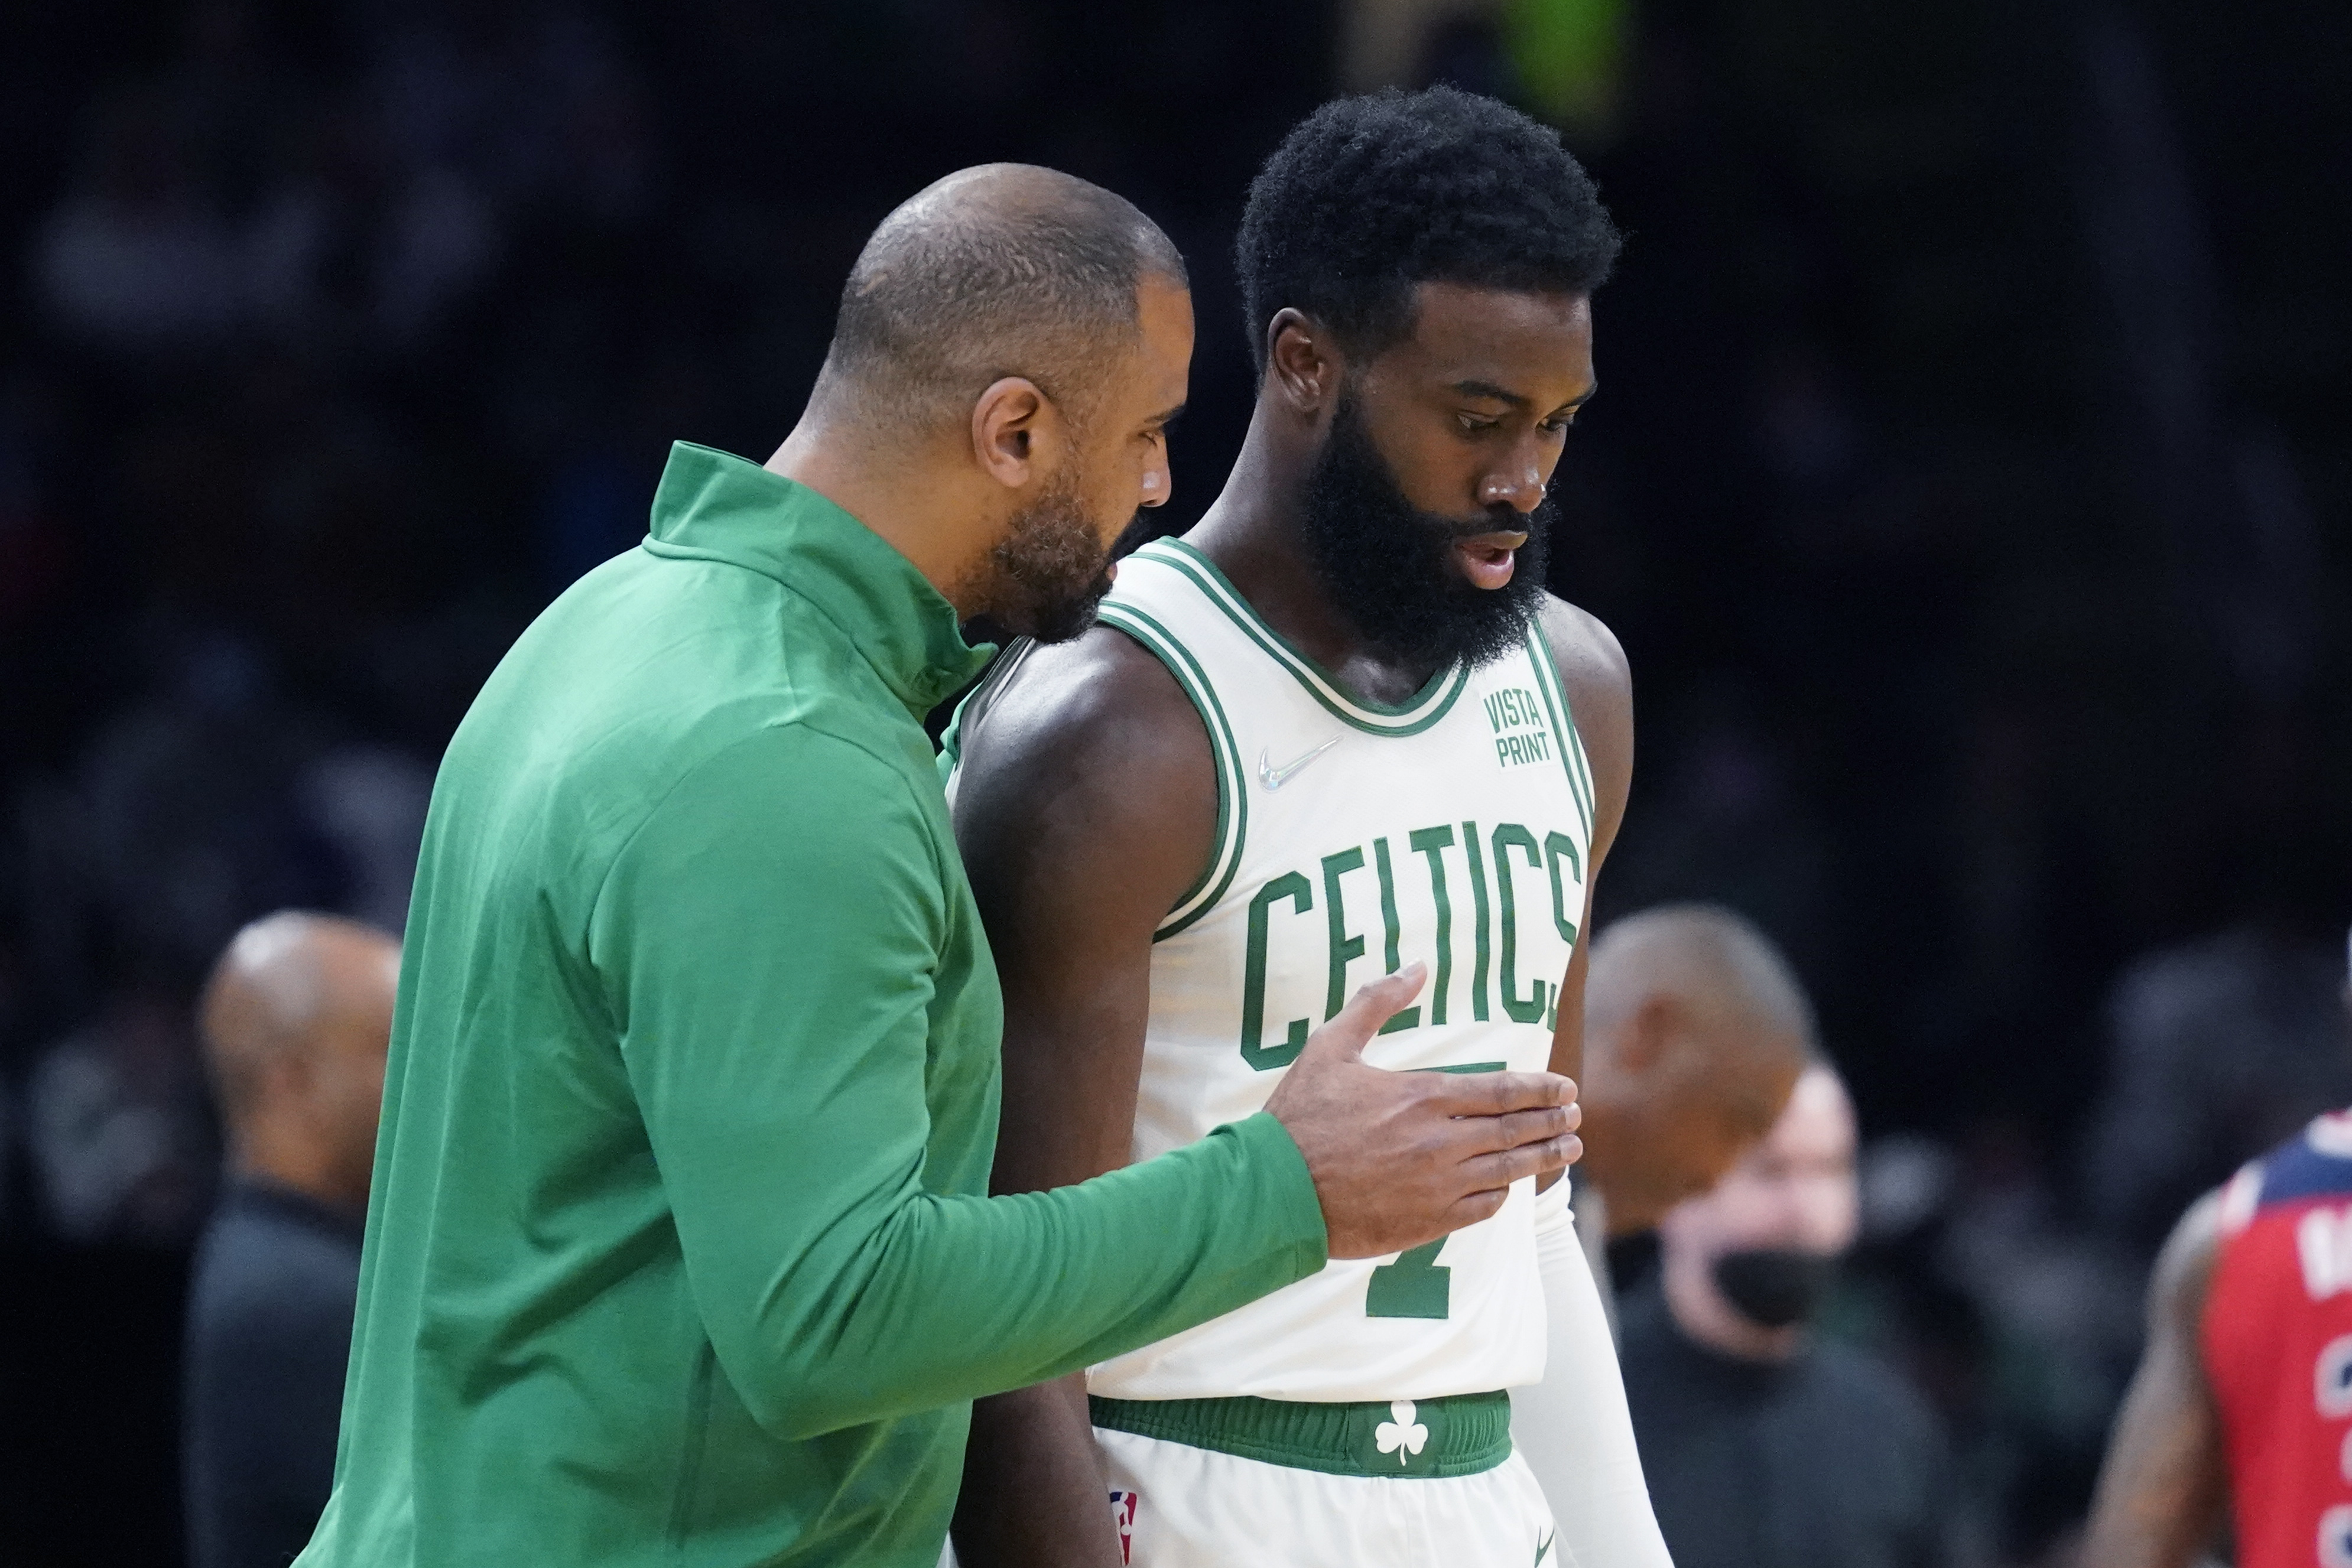 New rest rules don't bother NBA players, including Jaylen Brown